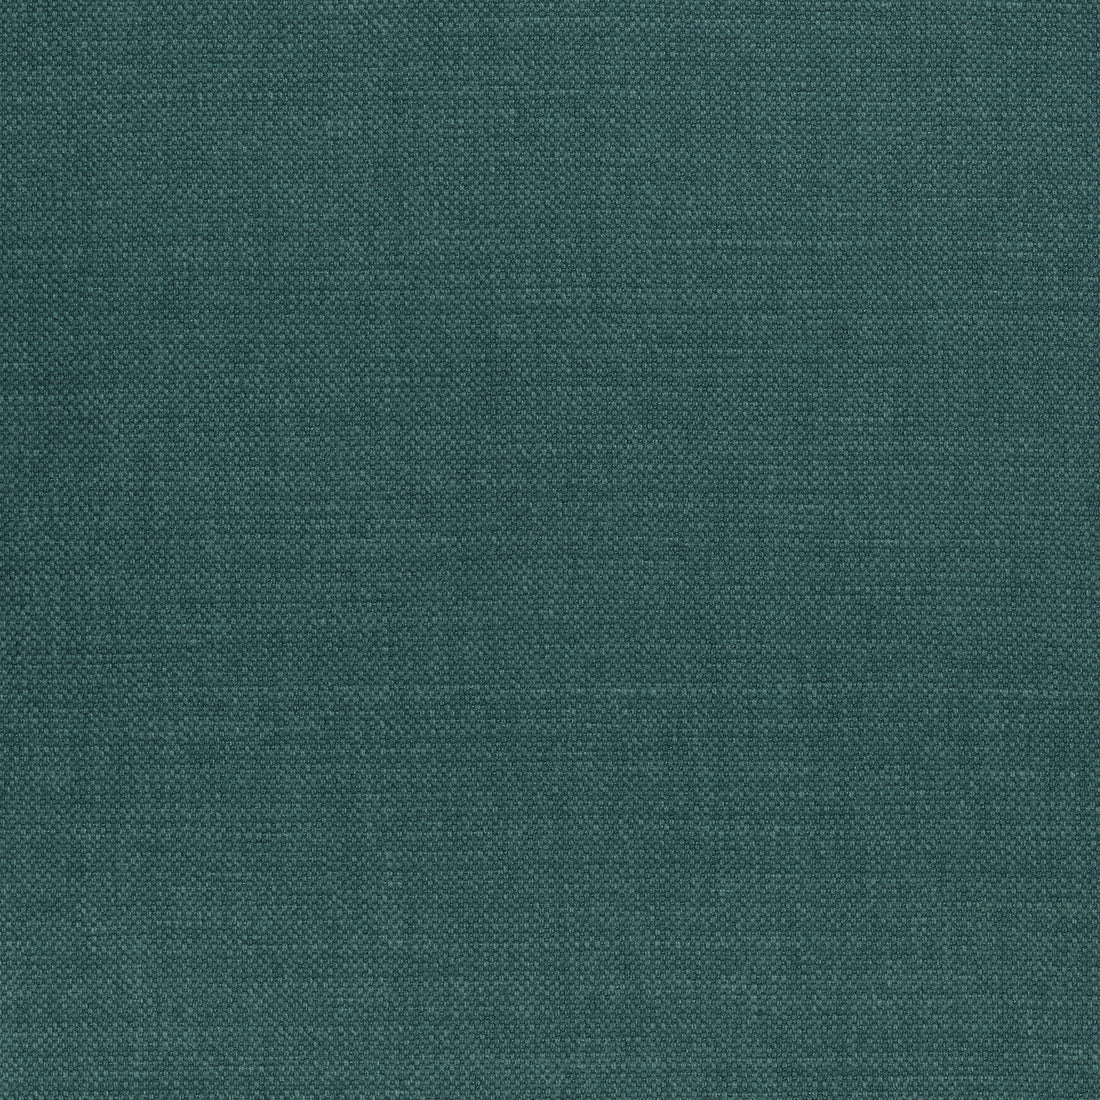 Prisma fabric in jade color - pattern number W70143 - by Thibaut in the Woven Resource Vol 12 Prisma Fabrics collection